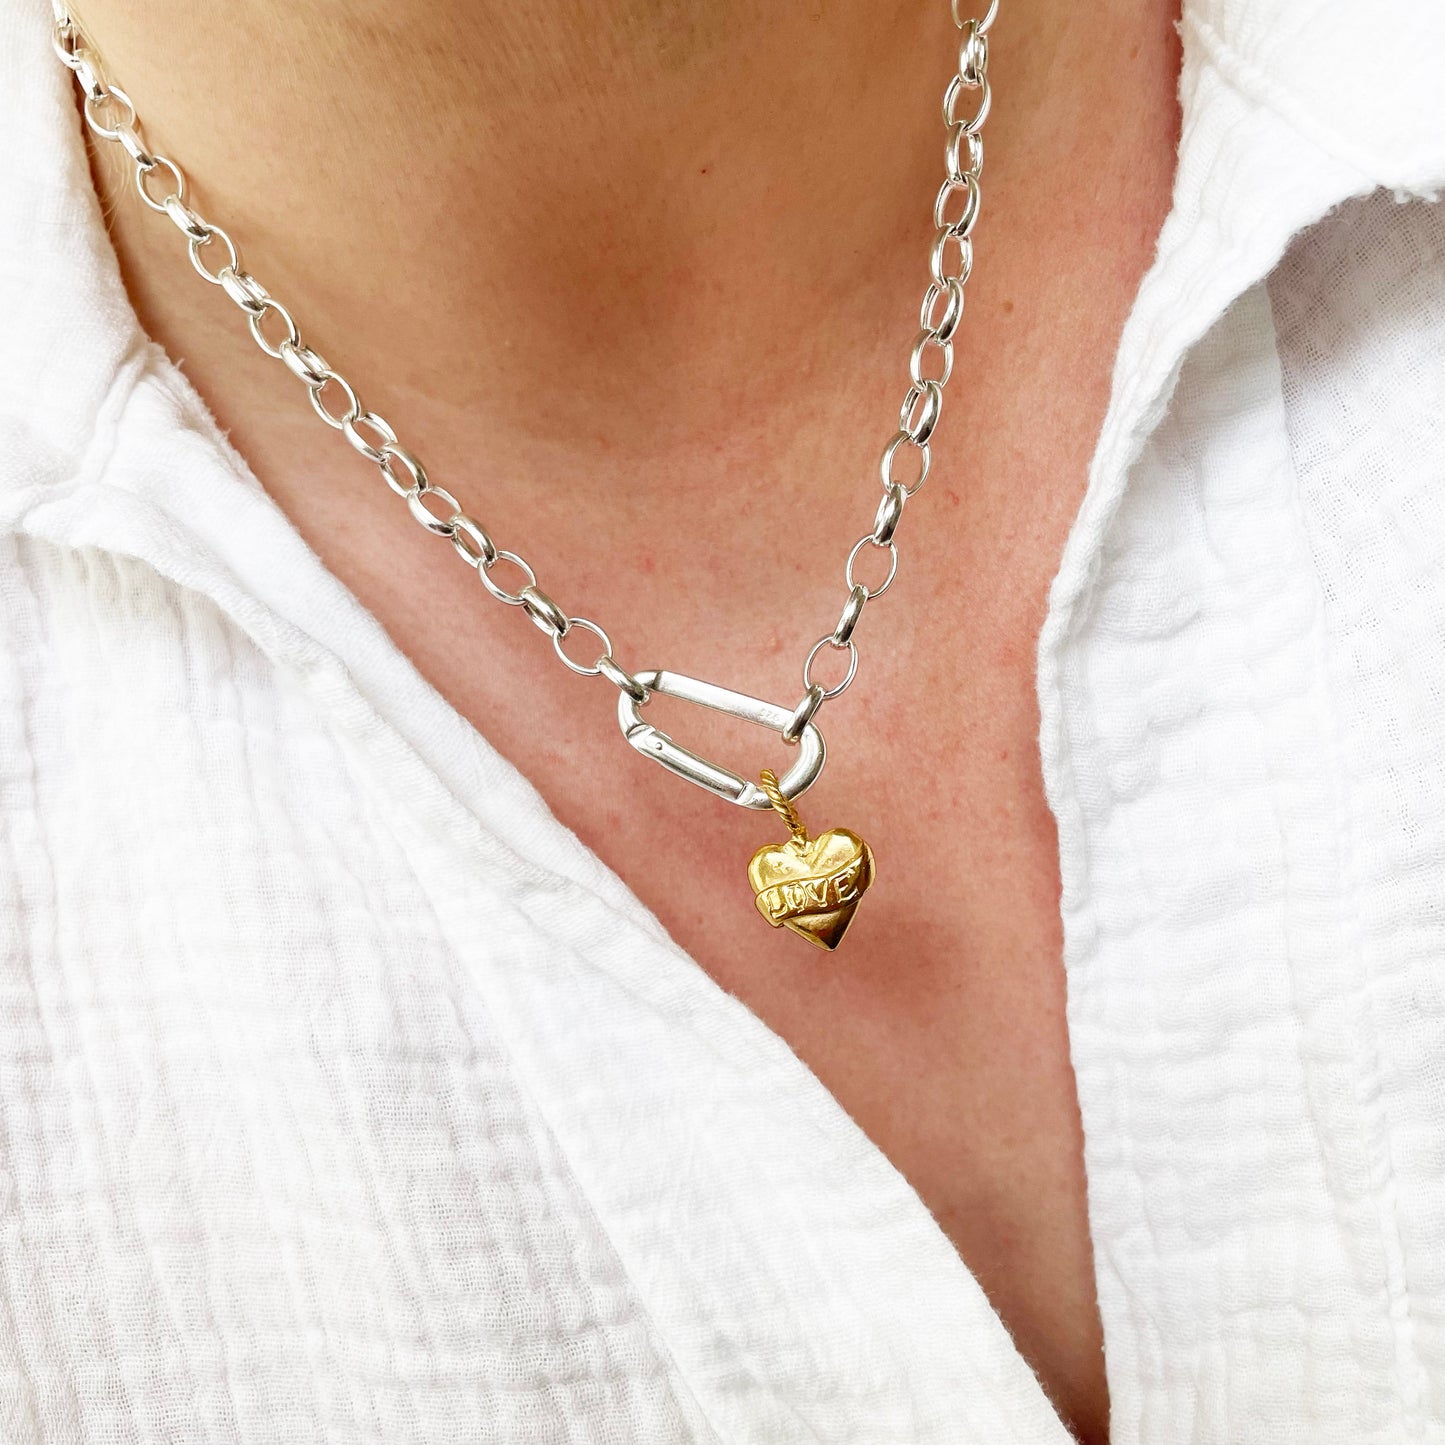 Shipmate - Gold & Silver Necklace